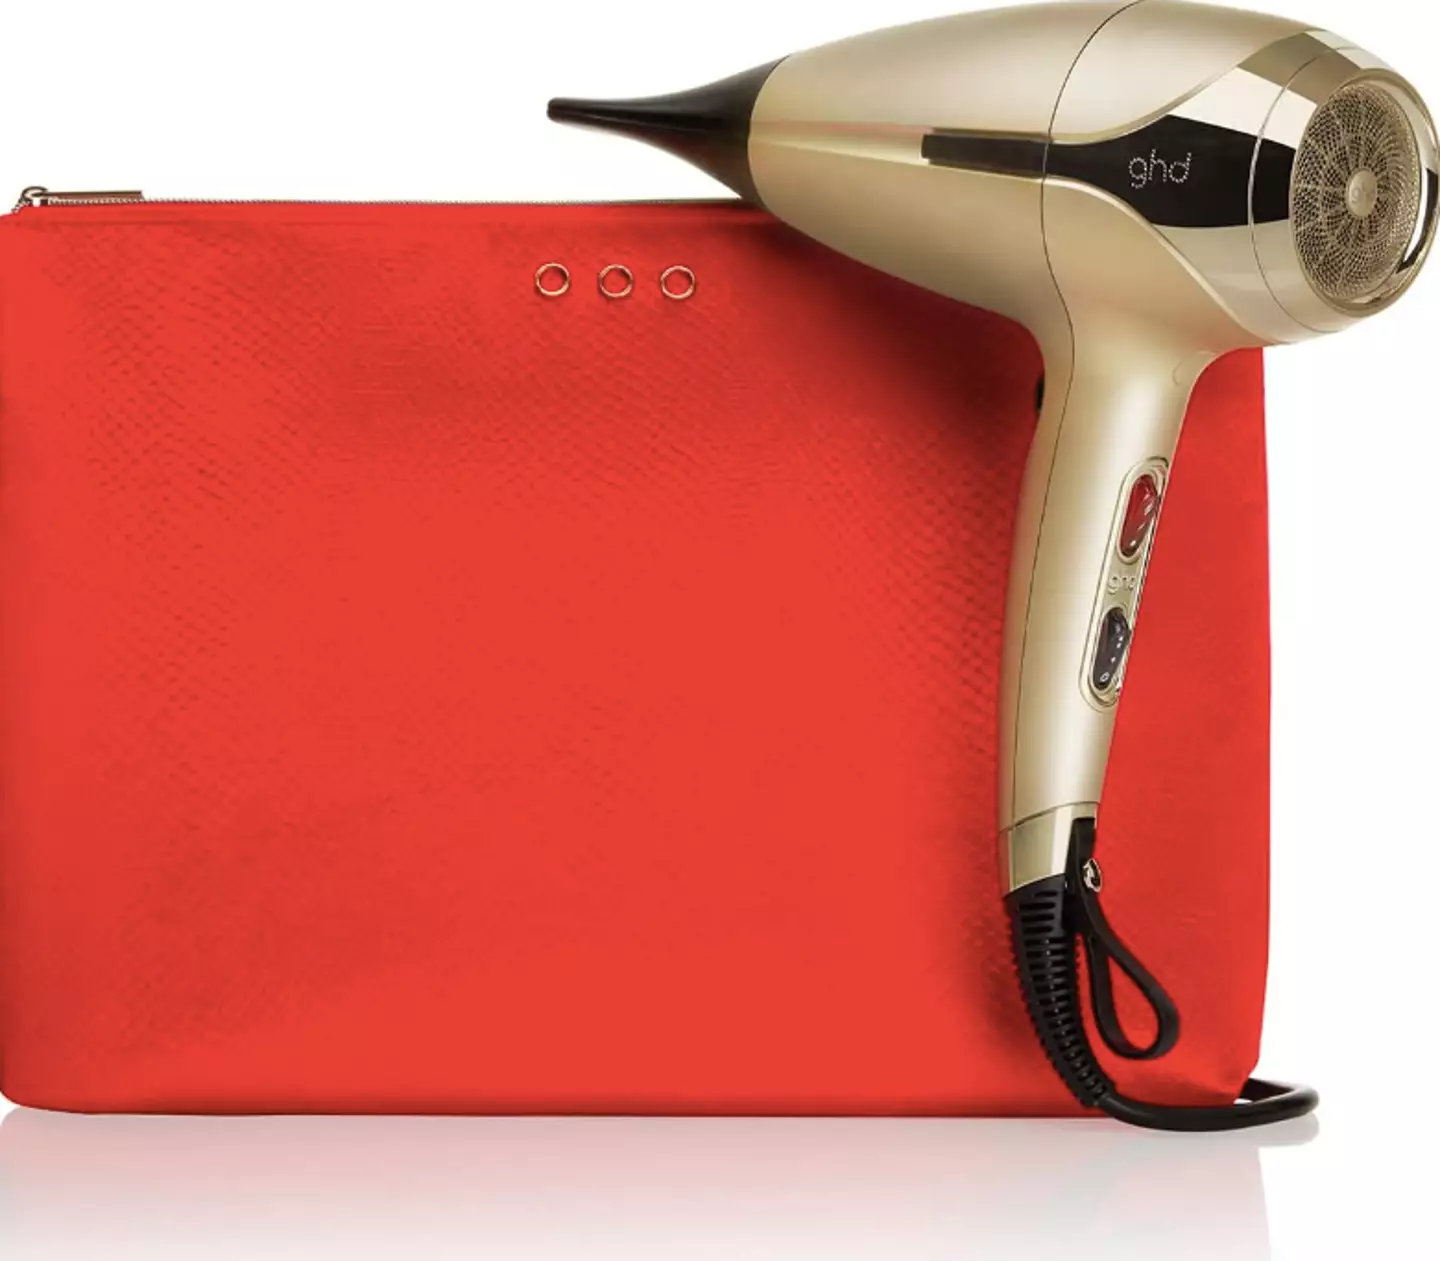 There's £38 off this Helios hairdryer and case set.